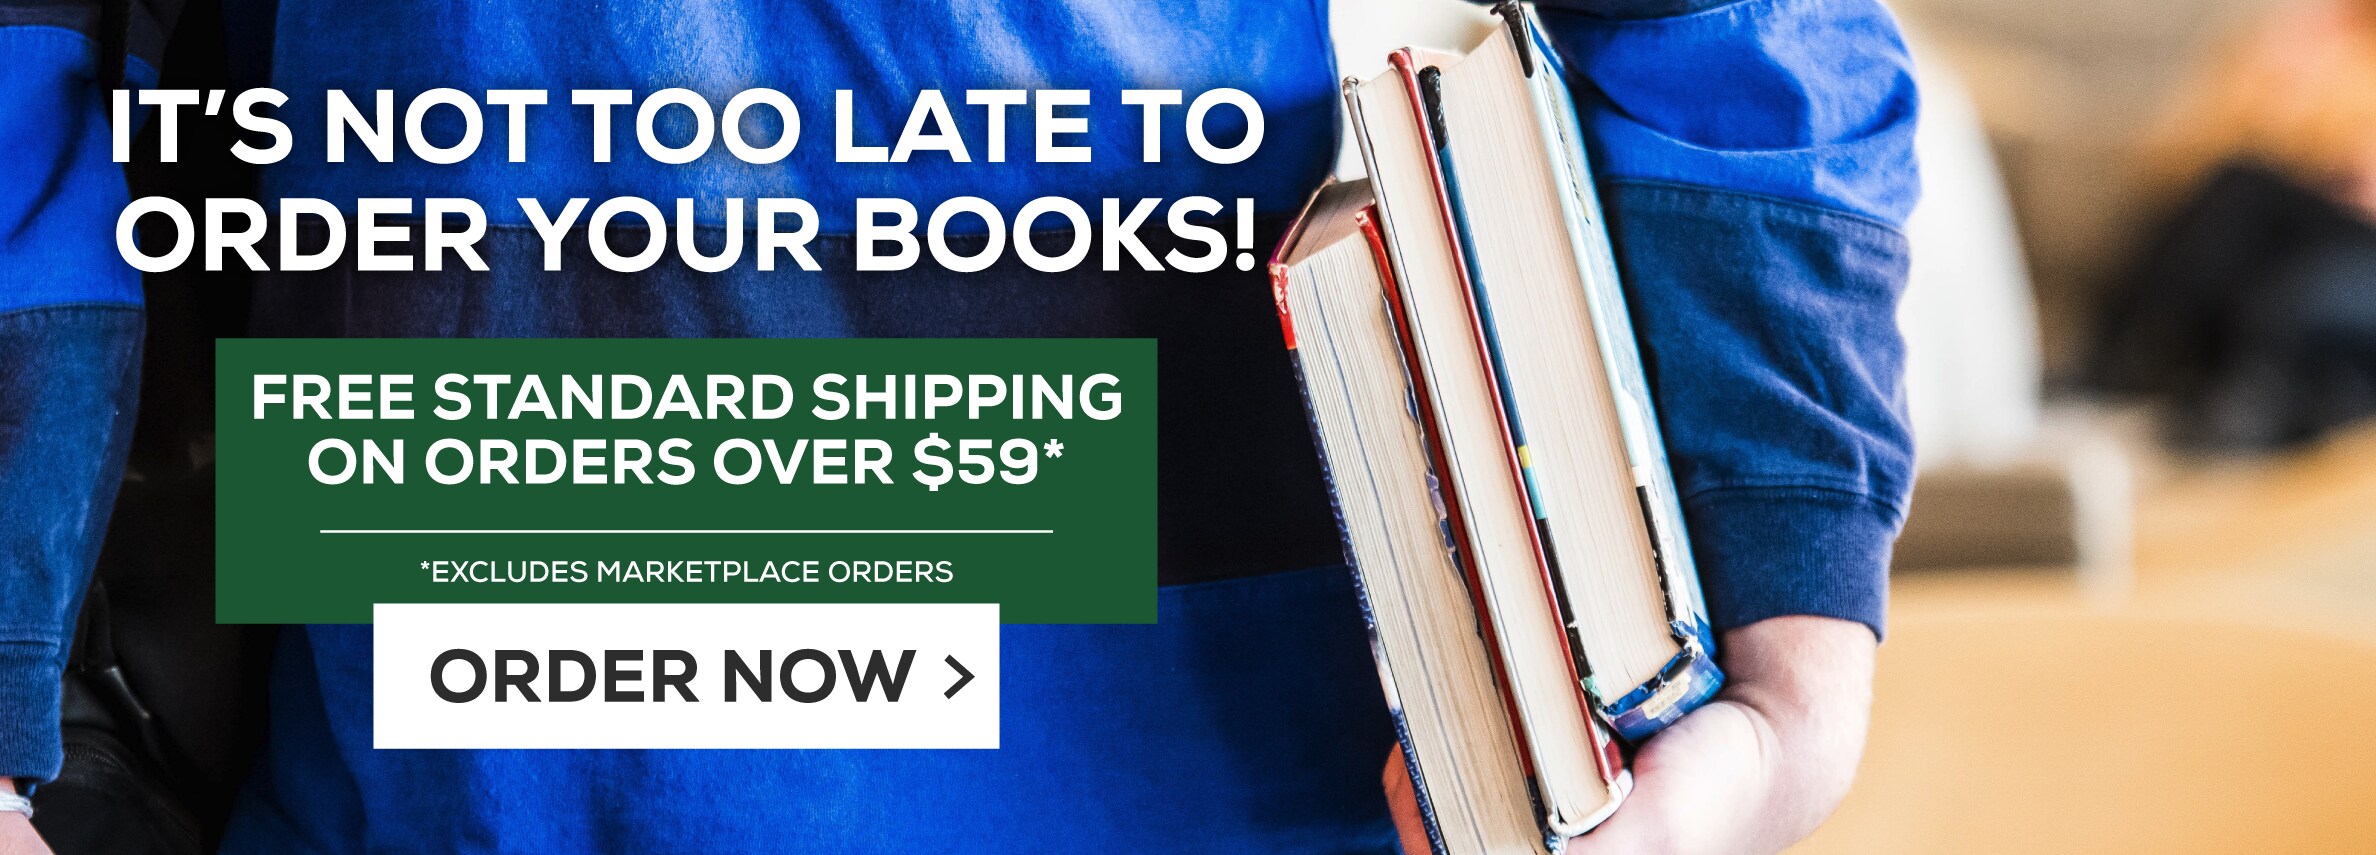 It's not too late to order your books! FREE standard shipping on all other orders over $59!* Excludes marketplace purchases. Order Now.